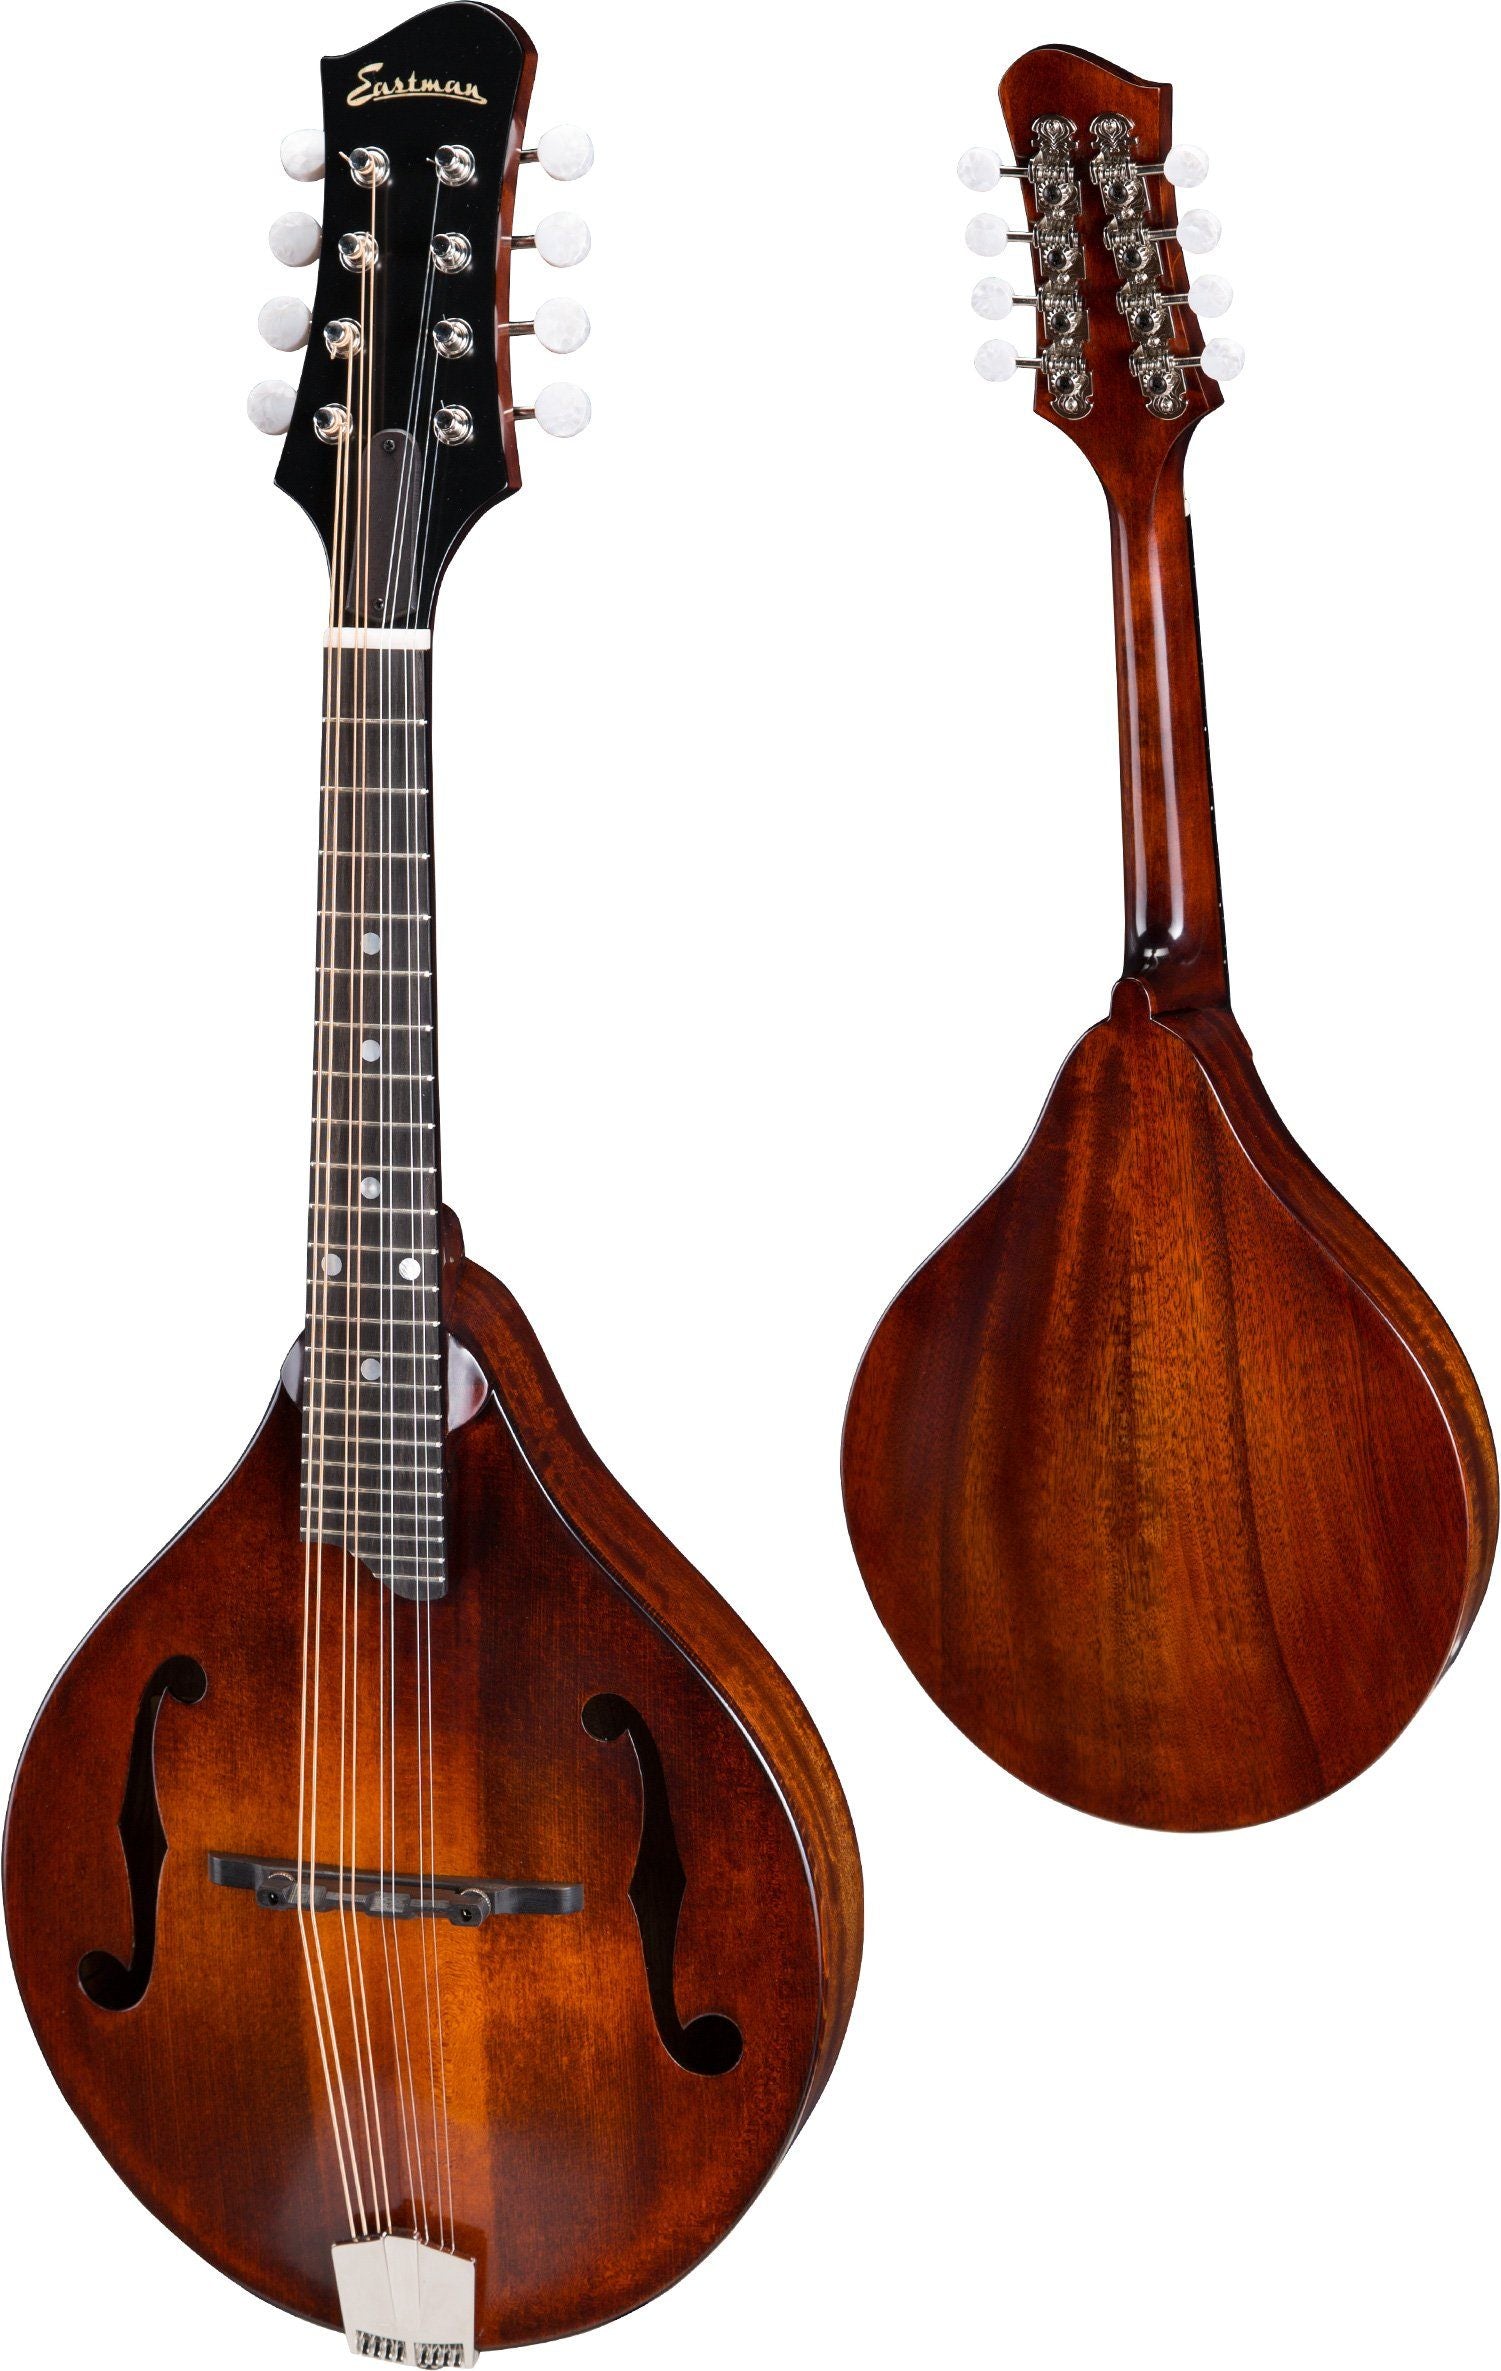 Eastman MD505CC Contour Comfort Mandolin (Classic Vintage Nitro finish,other specs same as MD505, w/Case), Mandolin for sale at Richards Guitars.